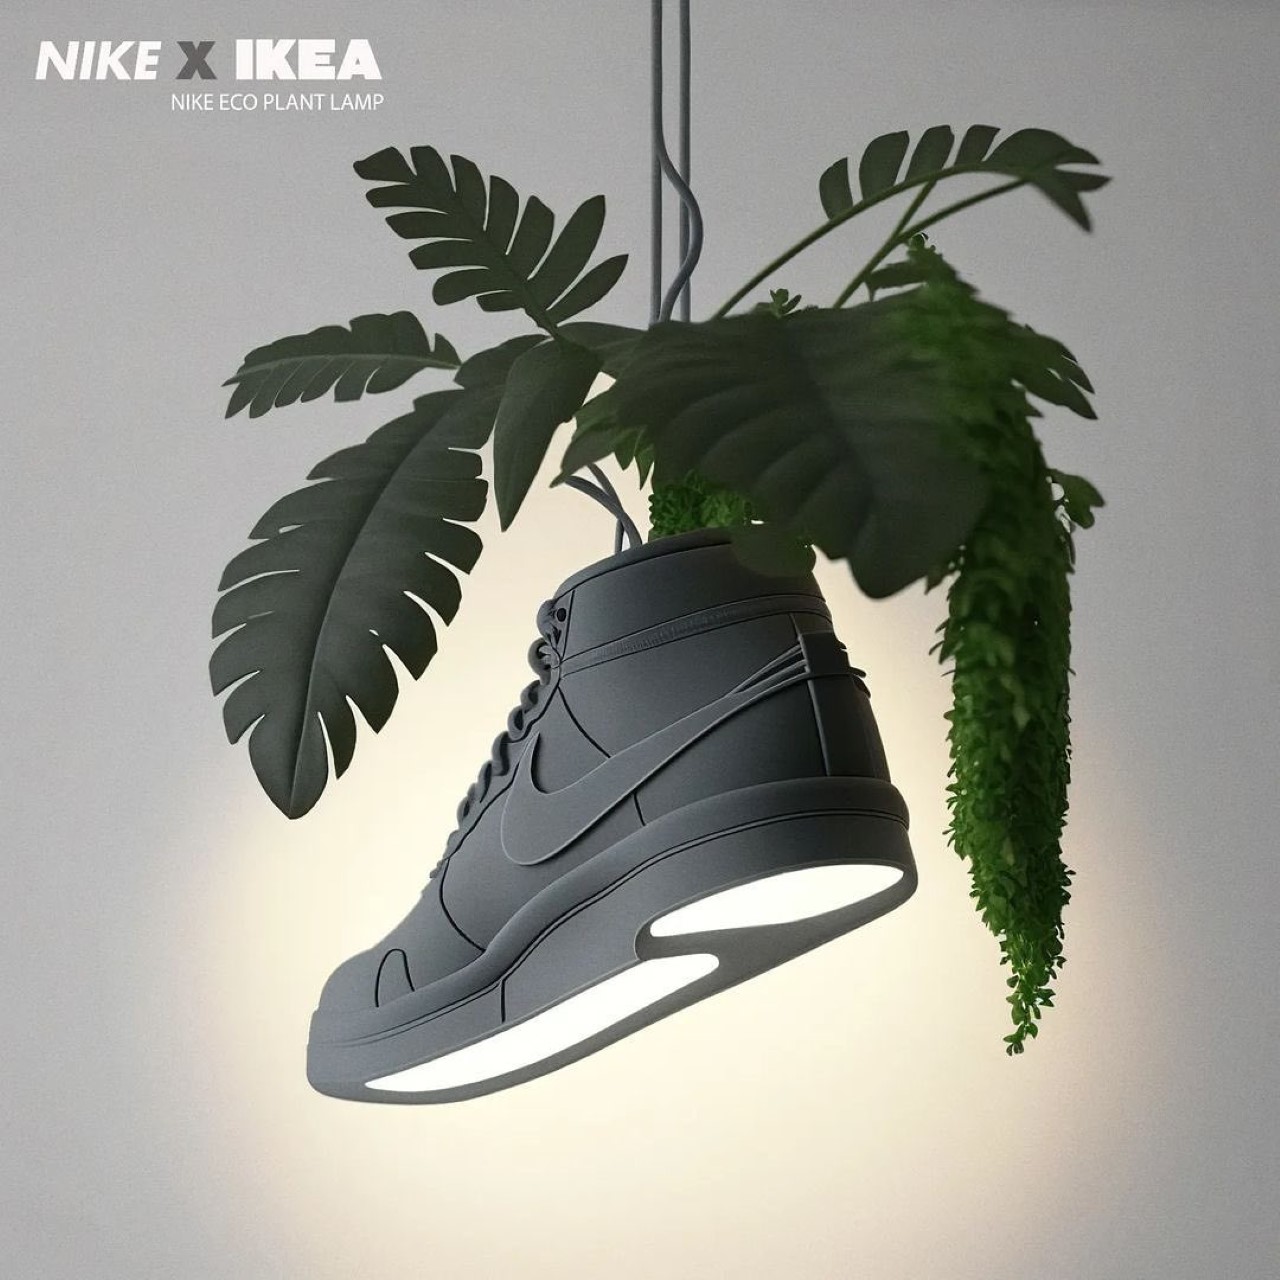 The Ultimate Nike x IKEA Mashup: These Sporty Decor Items Were Created by an AI - Yanko Design